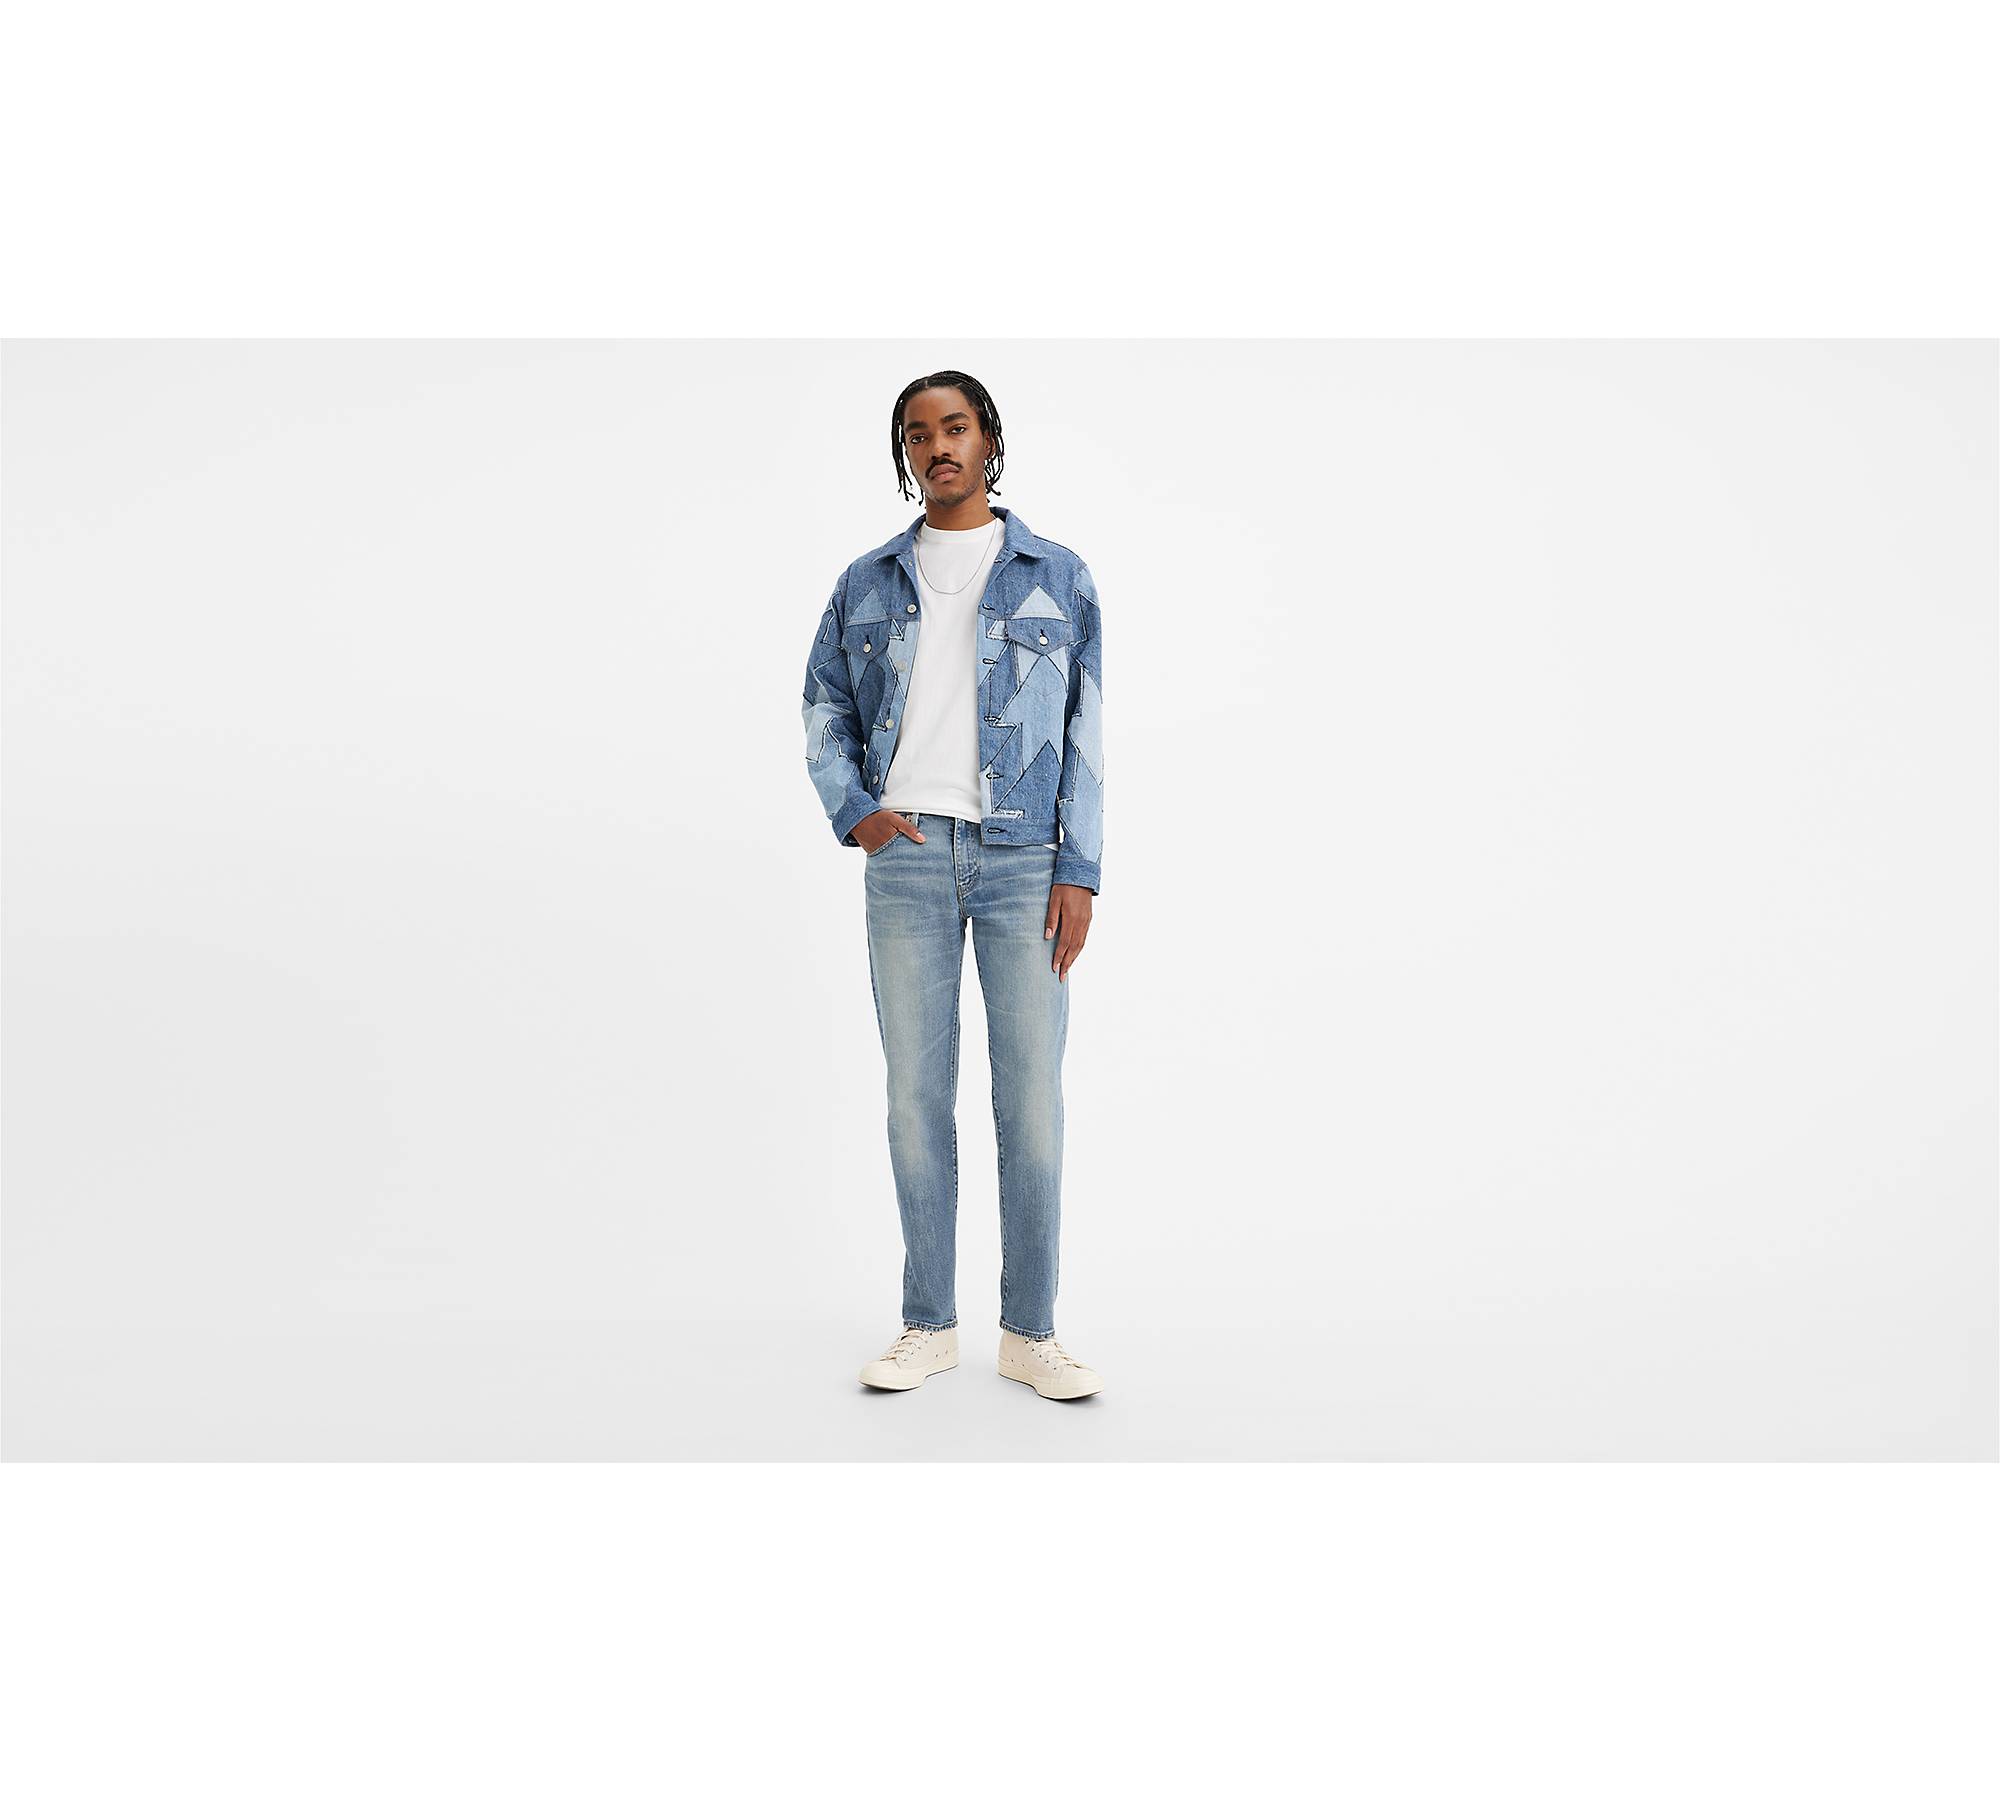 502™ Taper Jeans - Levi's Jeans, Jackets & Clothing